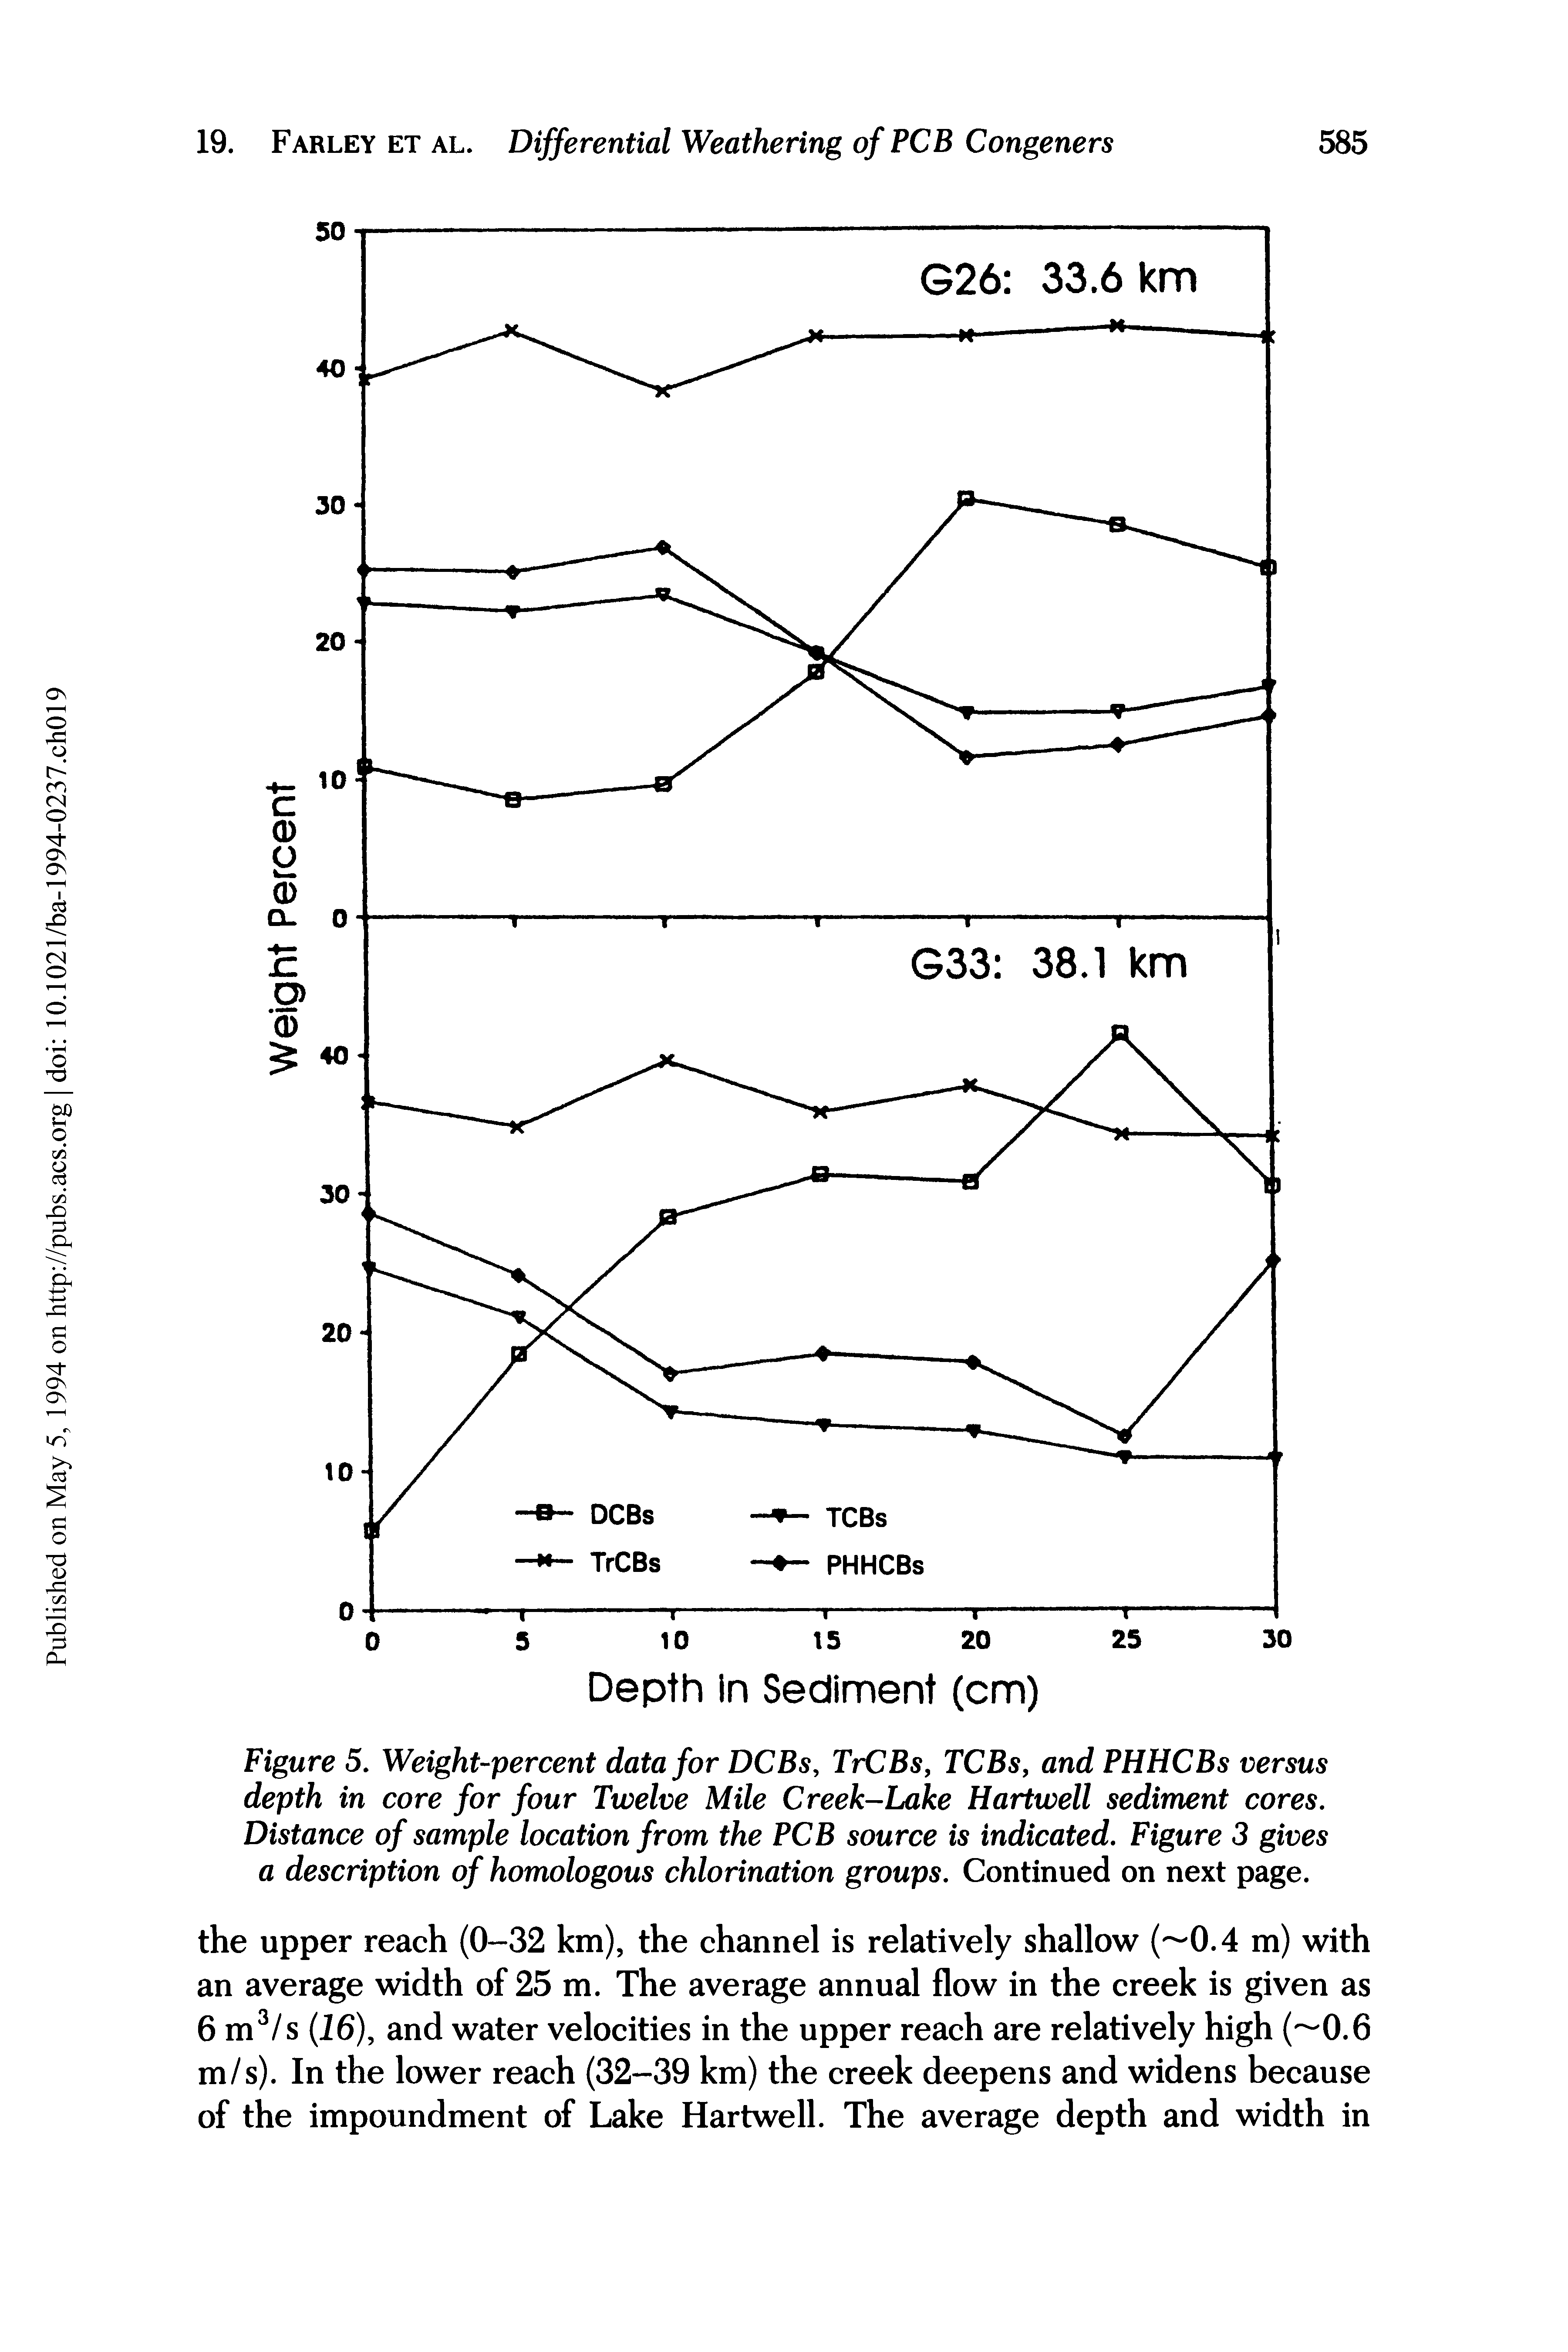 Figure 5. Weight-percent data for DCBs, TrCBs, TCBs, and PHHCBs versus depth in core for four Twelve Mile Creek-Lake Hartwell sediment cores. Distance of sample location from the PCB source is indicated. Figure 3 gives a description of homologous chlorination groups. Continued on next page.